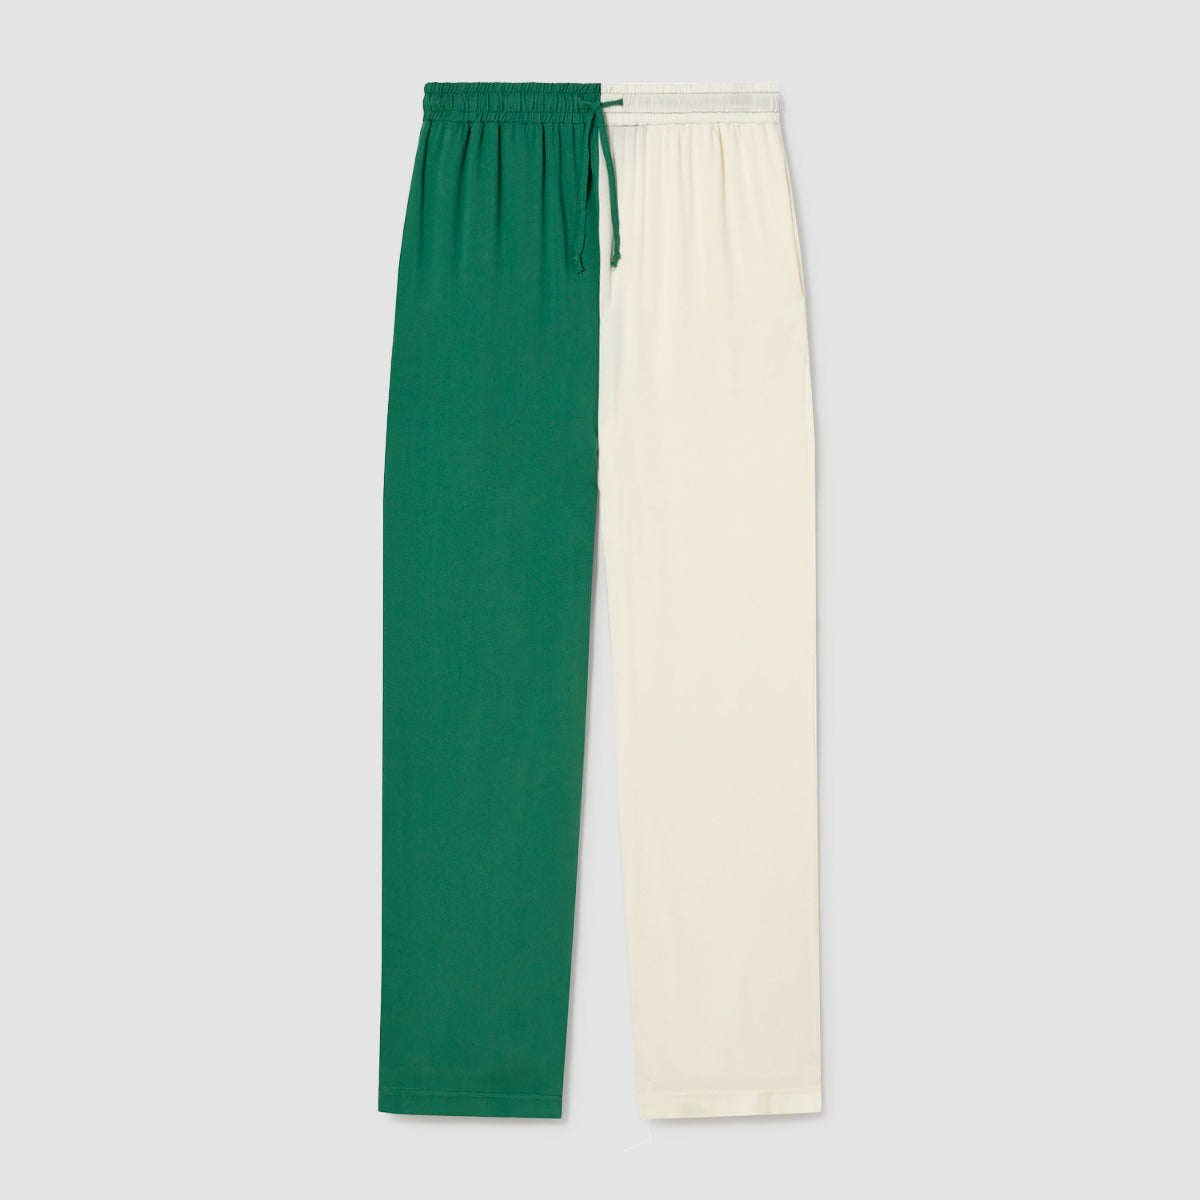 Green and White Pants 1973